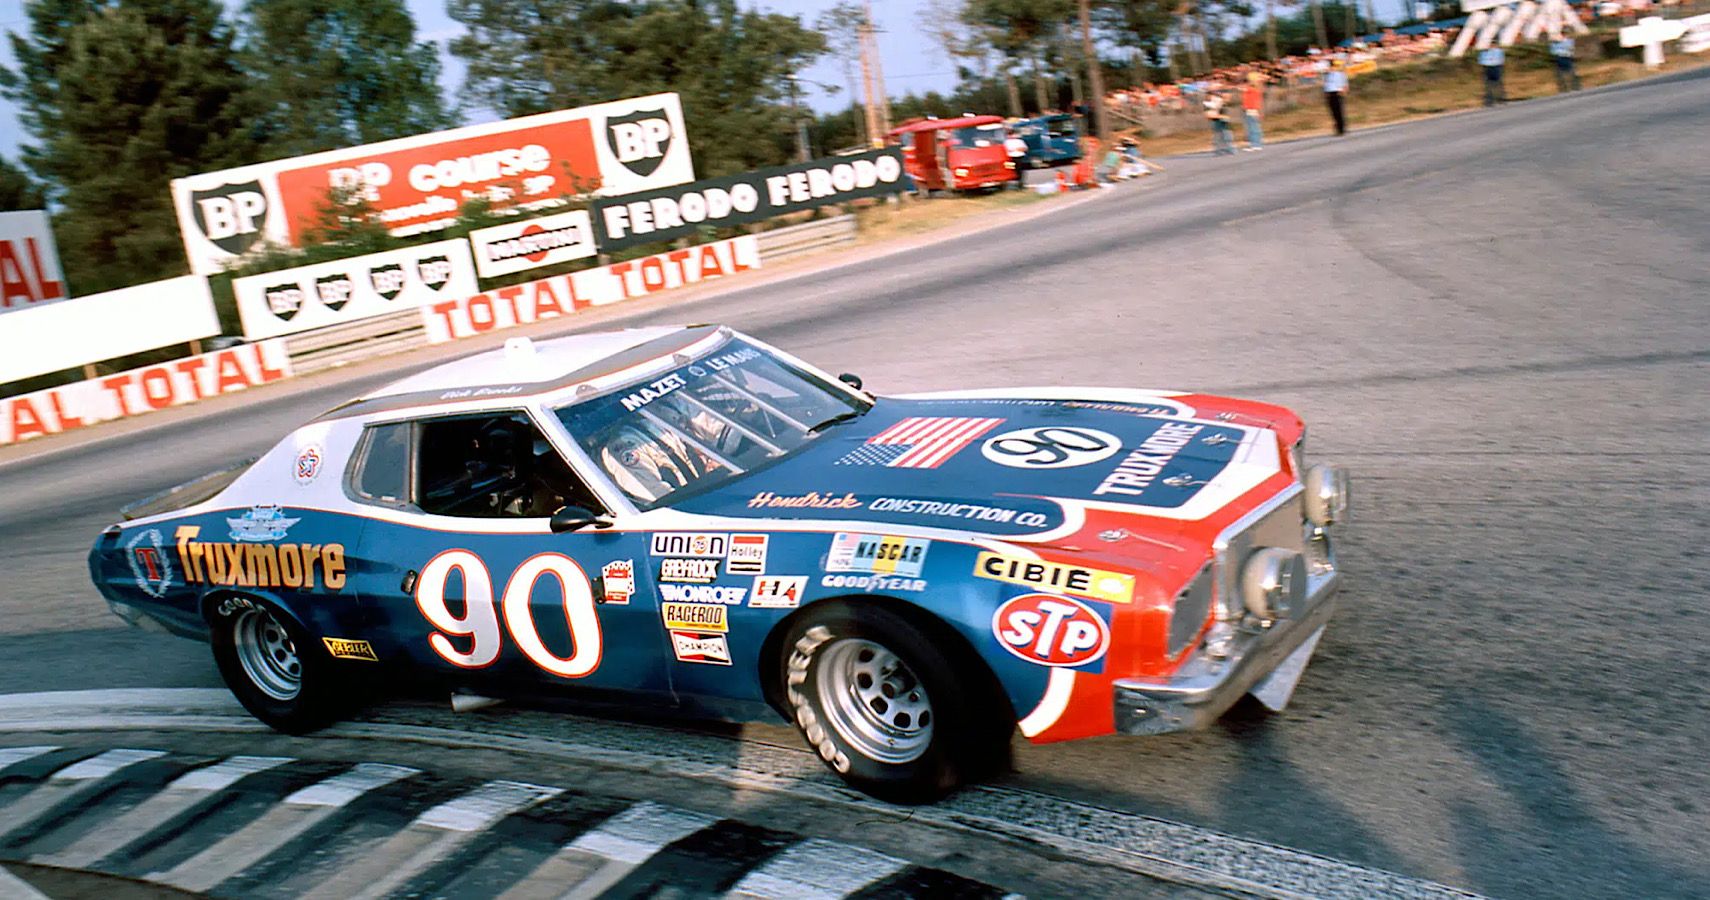 A Ford Torino Actually Raced In The 1976 24 Hours Of Le Mans